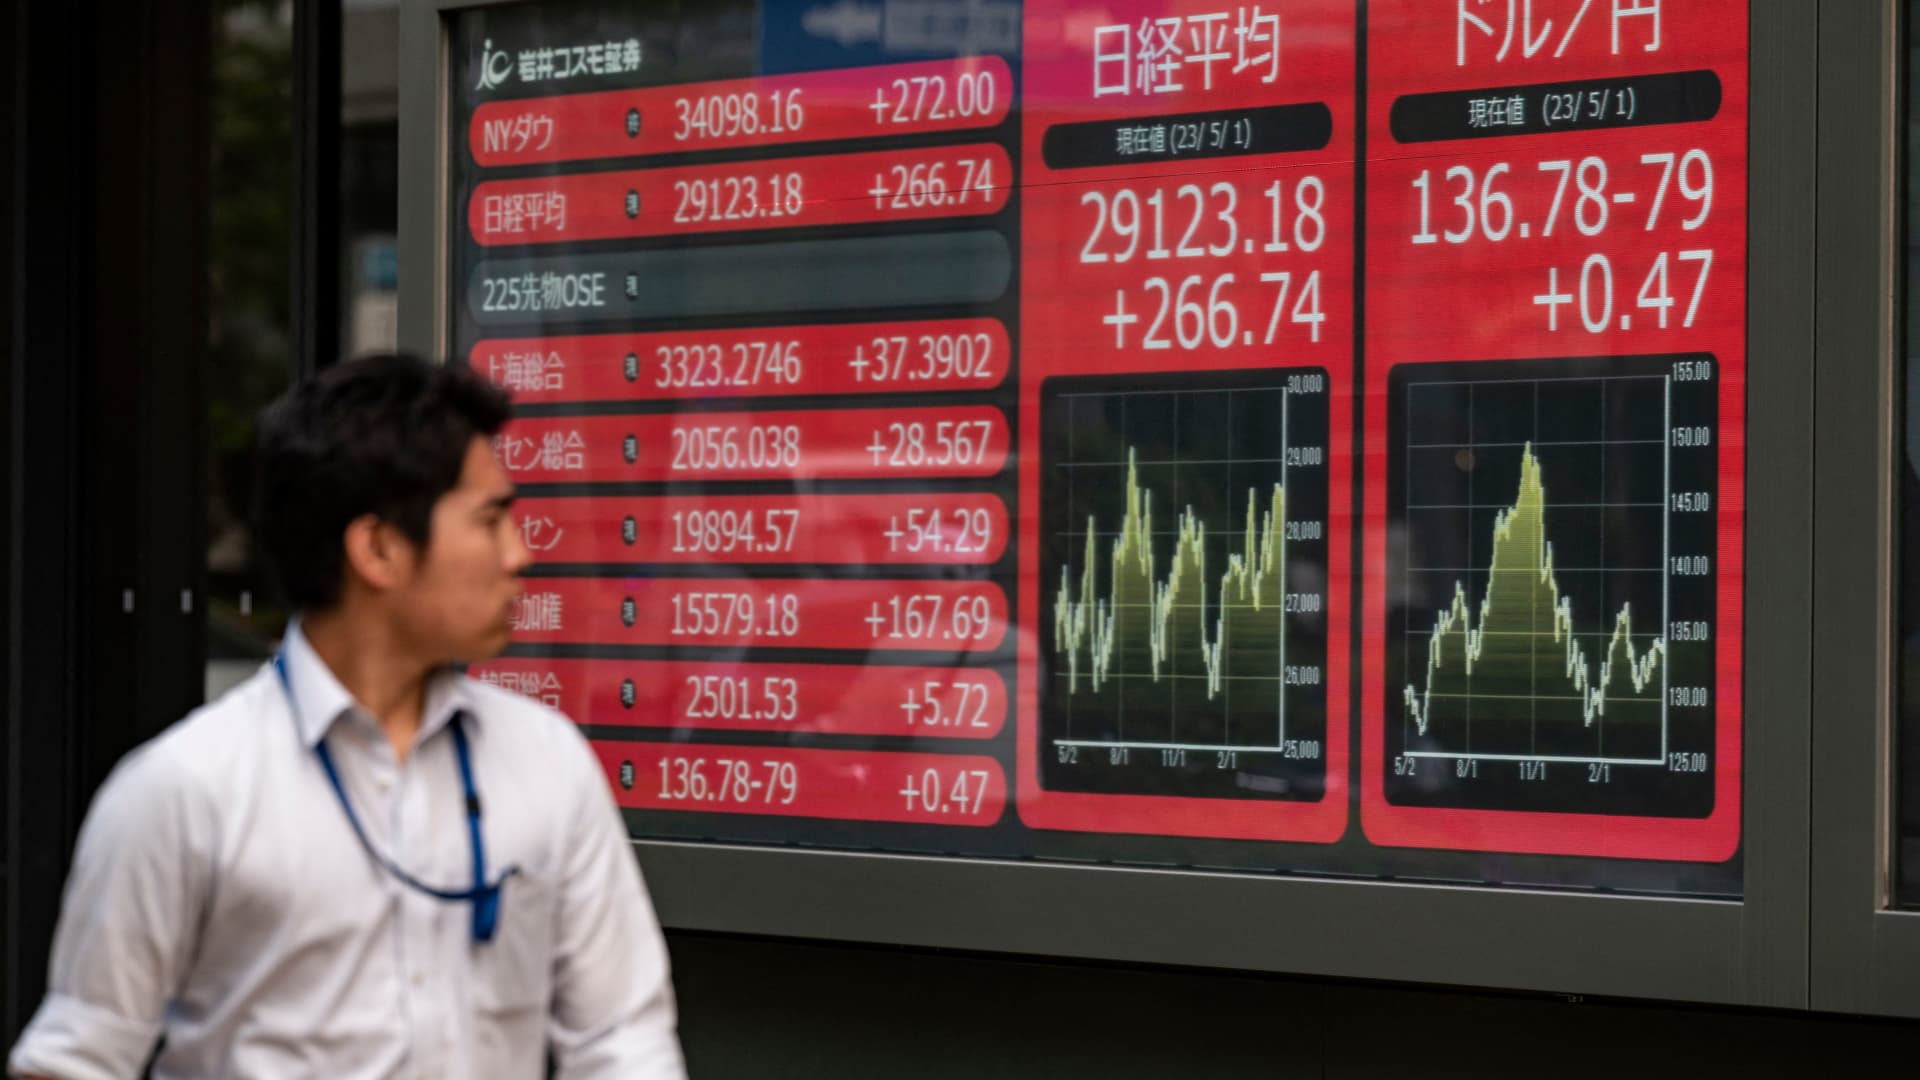 Japanese stocks can soar 50%, says advisor — and investors can cash in with these ETFs